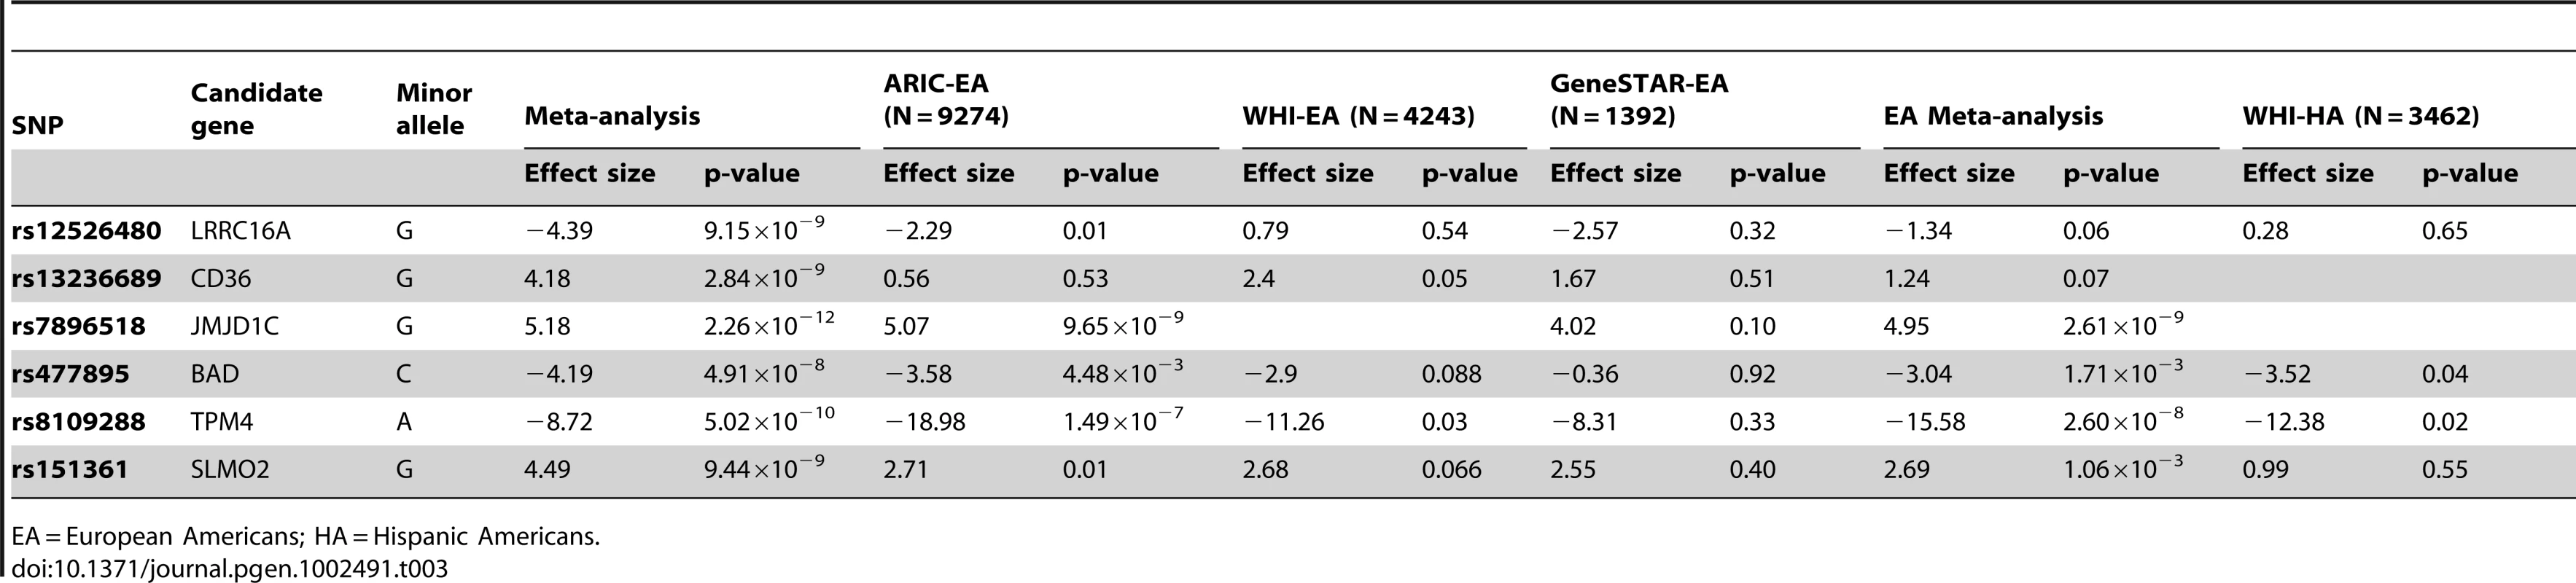 Replication of the association of the best SNPs from each novel region with platelet count in three European American cohorts and a Hispanic American cohort.